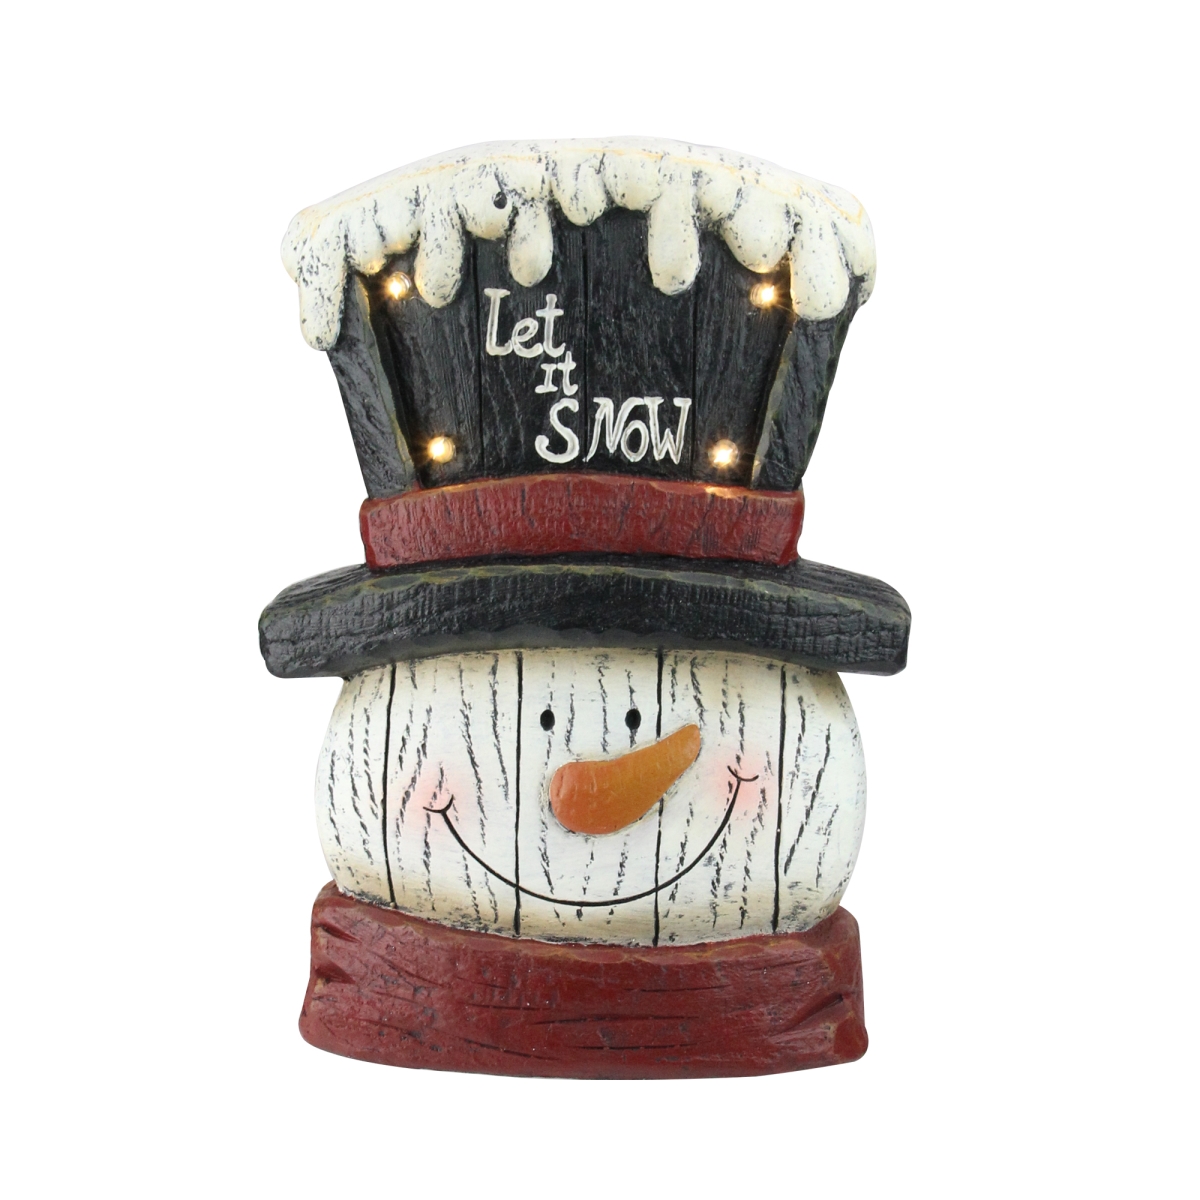 32922985 13 In. Pre-lit Led Snowman Weathered Table Top Christmas Decoration